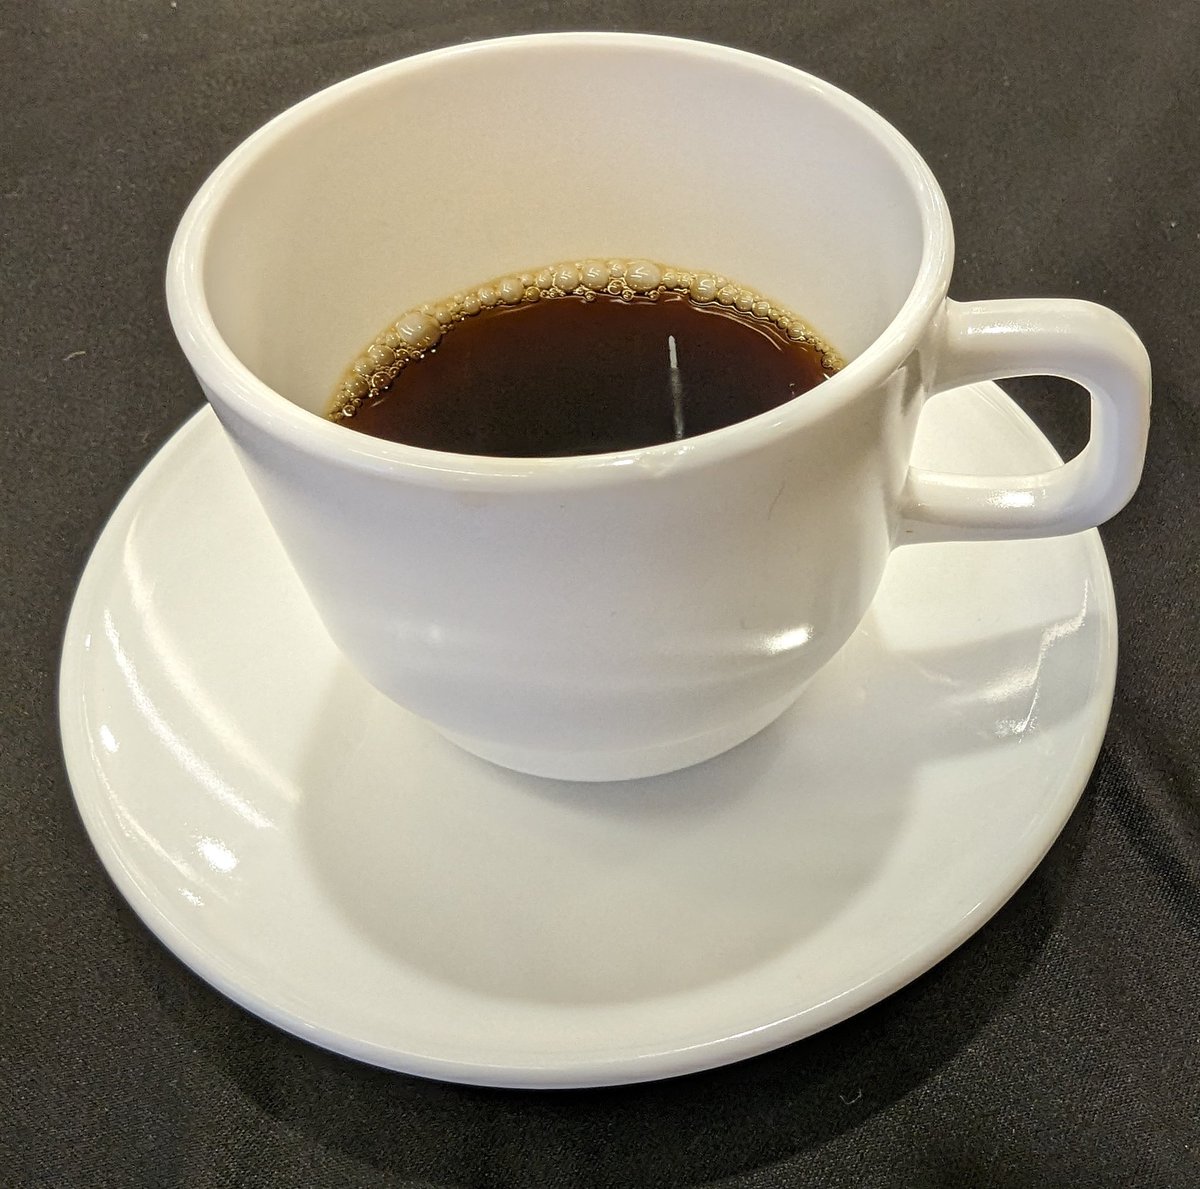 A very necessary cup of Colombian coffee after lunch Have you tried Colombian coffee before?